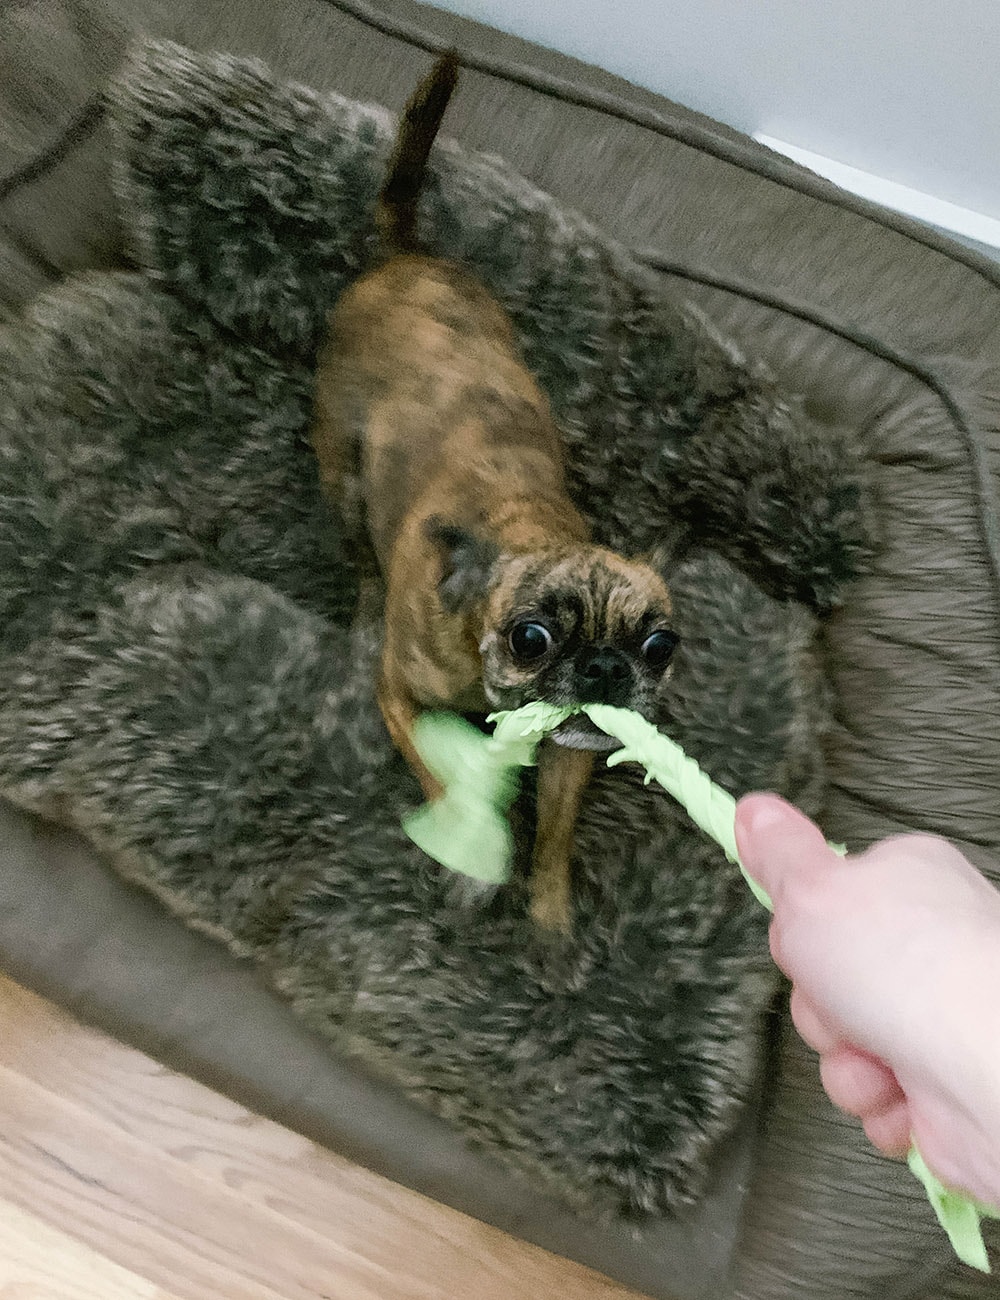 Small dog playing with tug toy